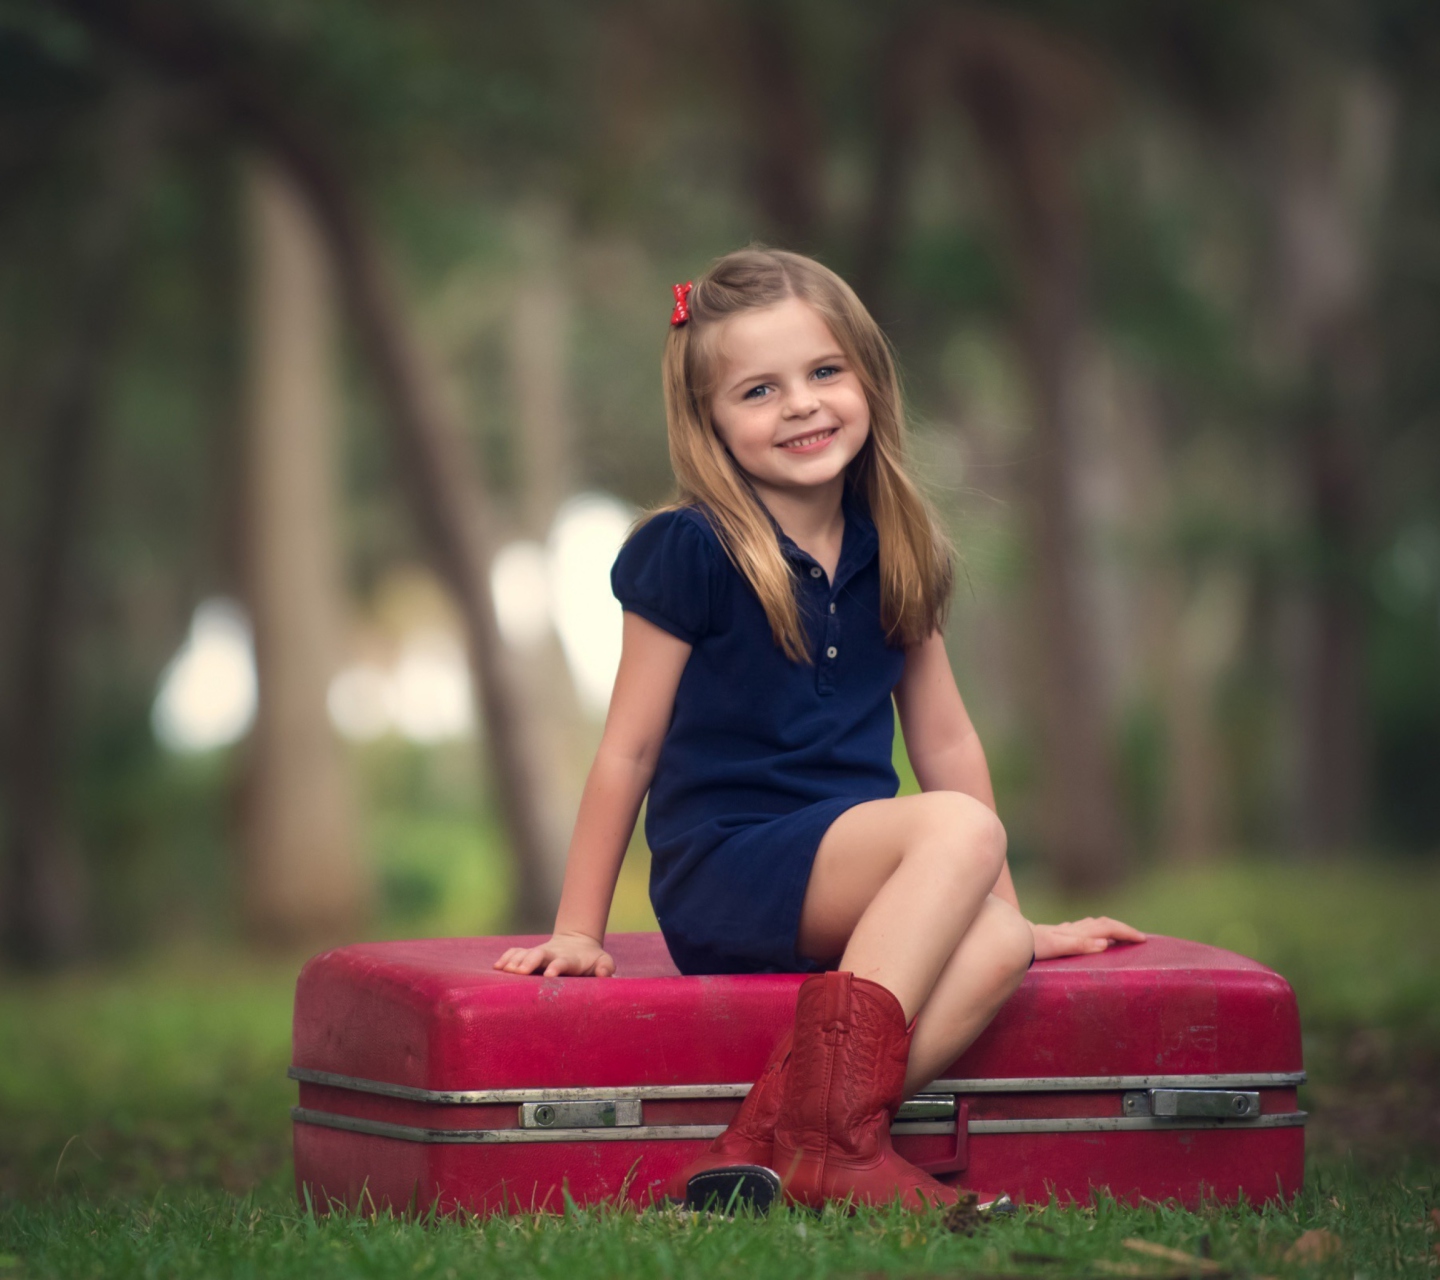 Little Girl Sitting On Red Suitcase wallpaper 1440x1280